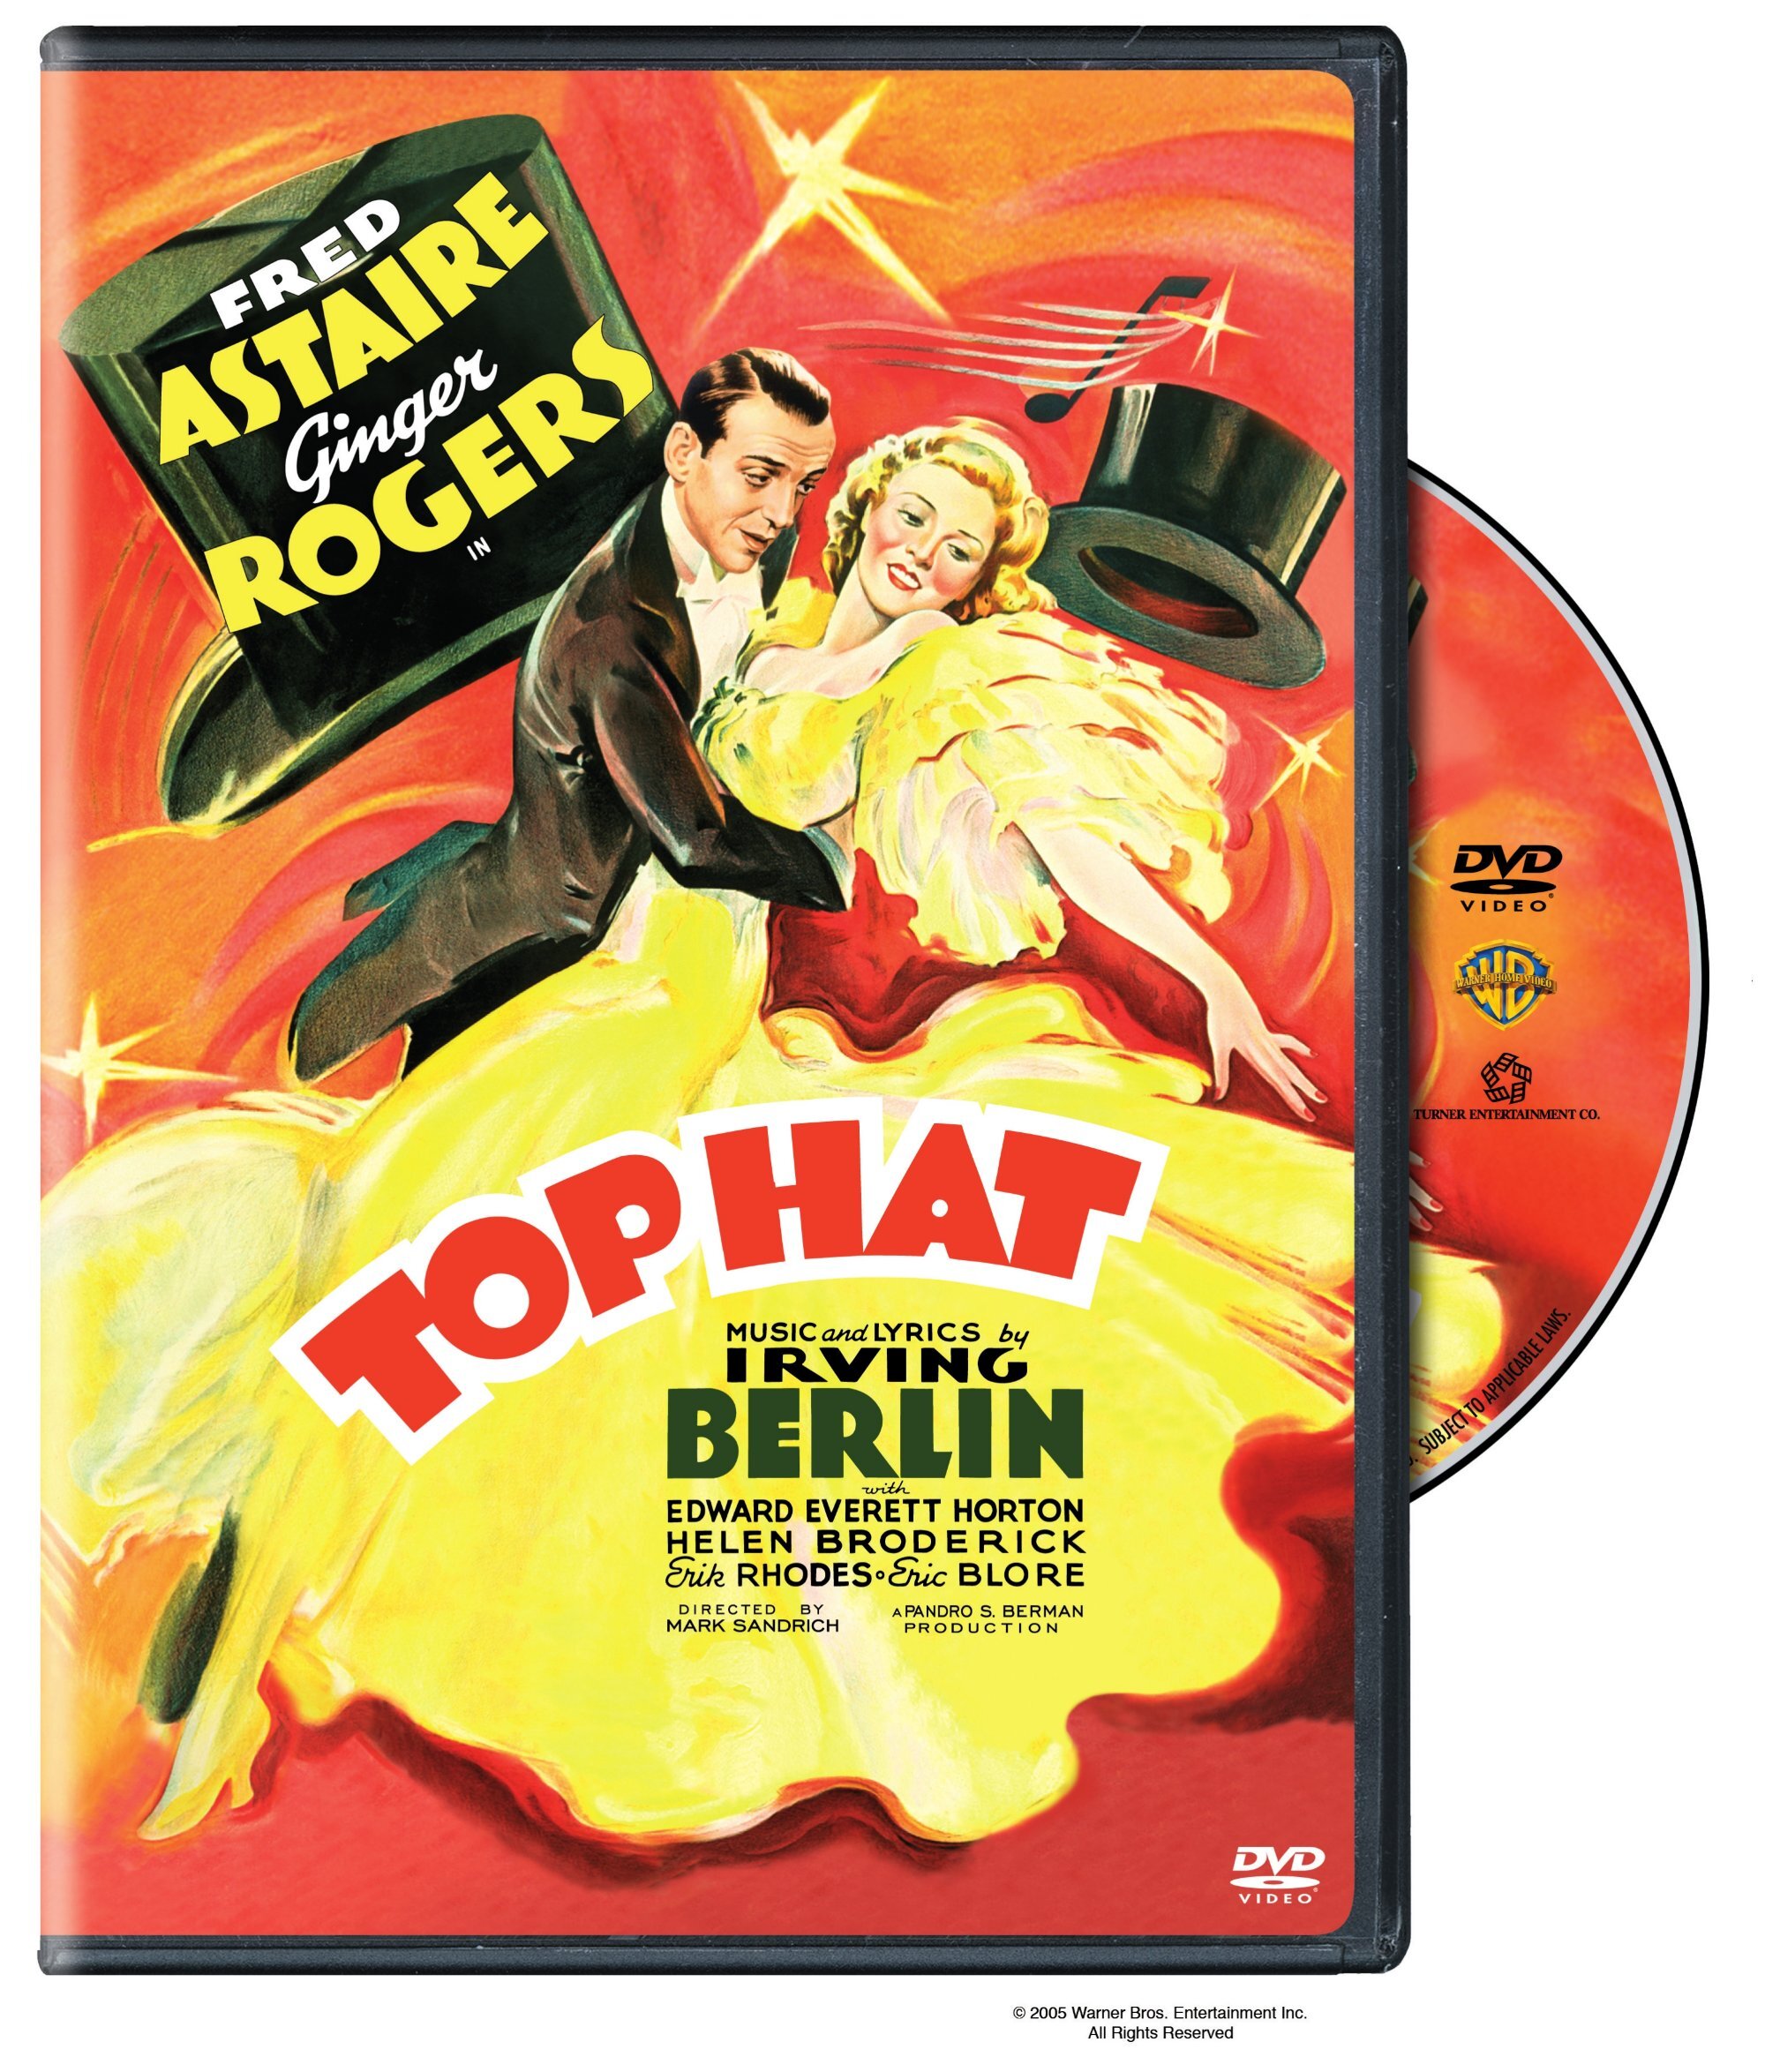 Top Hat - DVD [ 1935 ]  - Musical Movies On DVD - Movies On GRUV